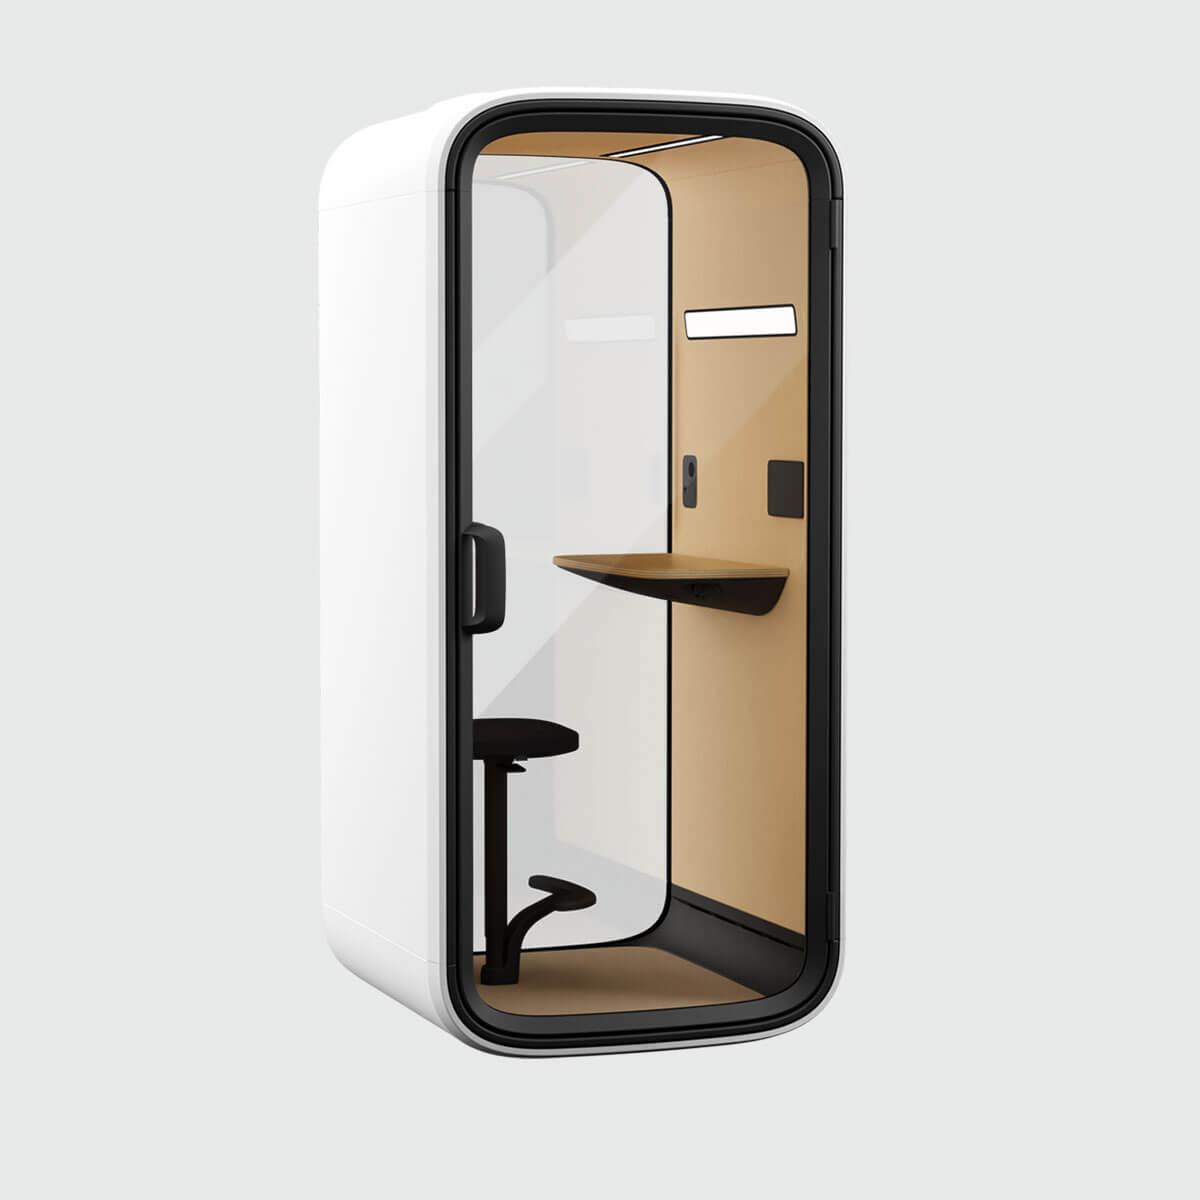 Framery One Compact, smart office phone booth